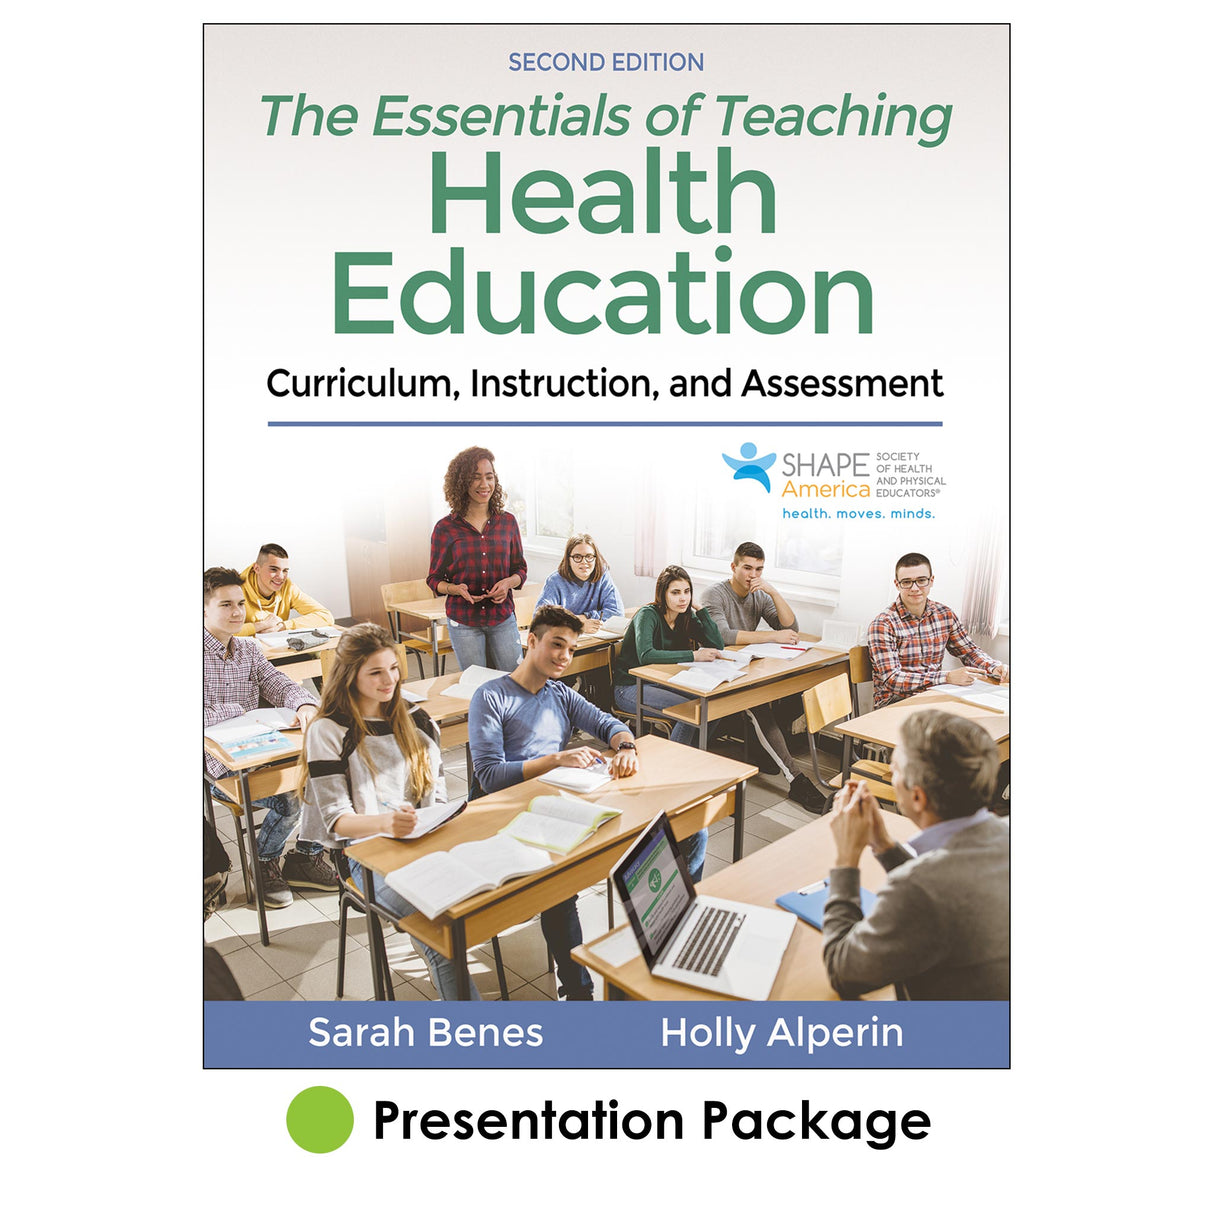 Essentials of Teaching Health Education 2nd Edition Presentation Package, The